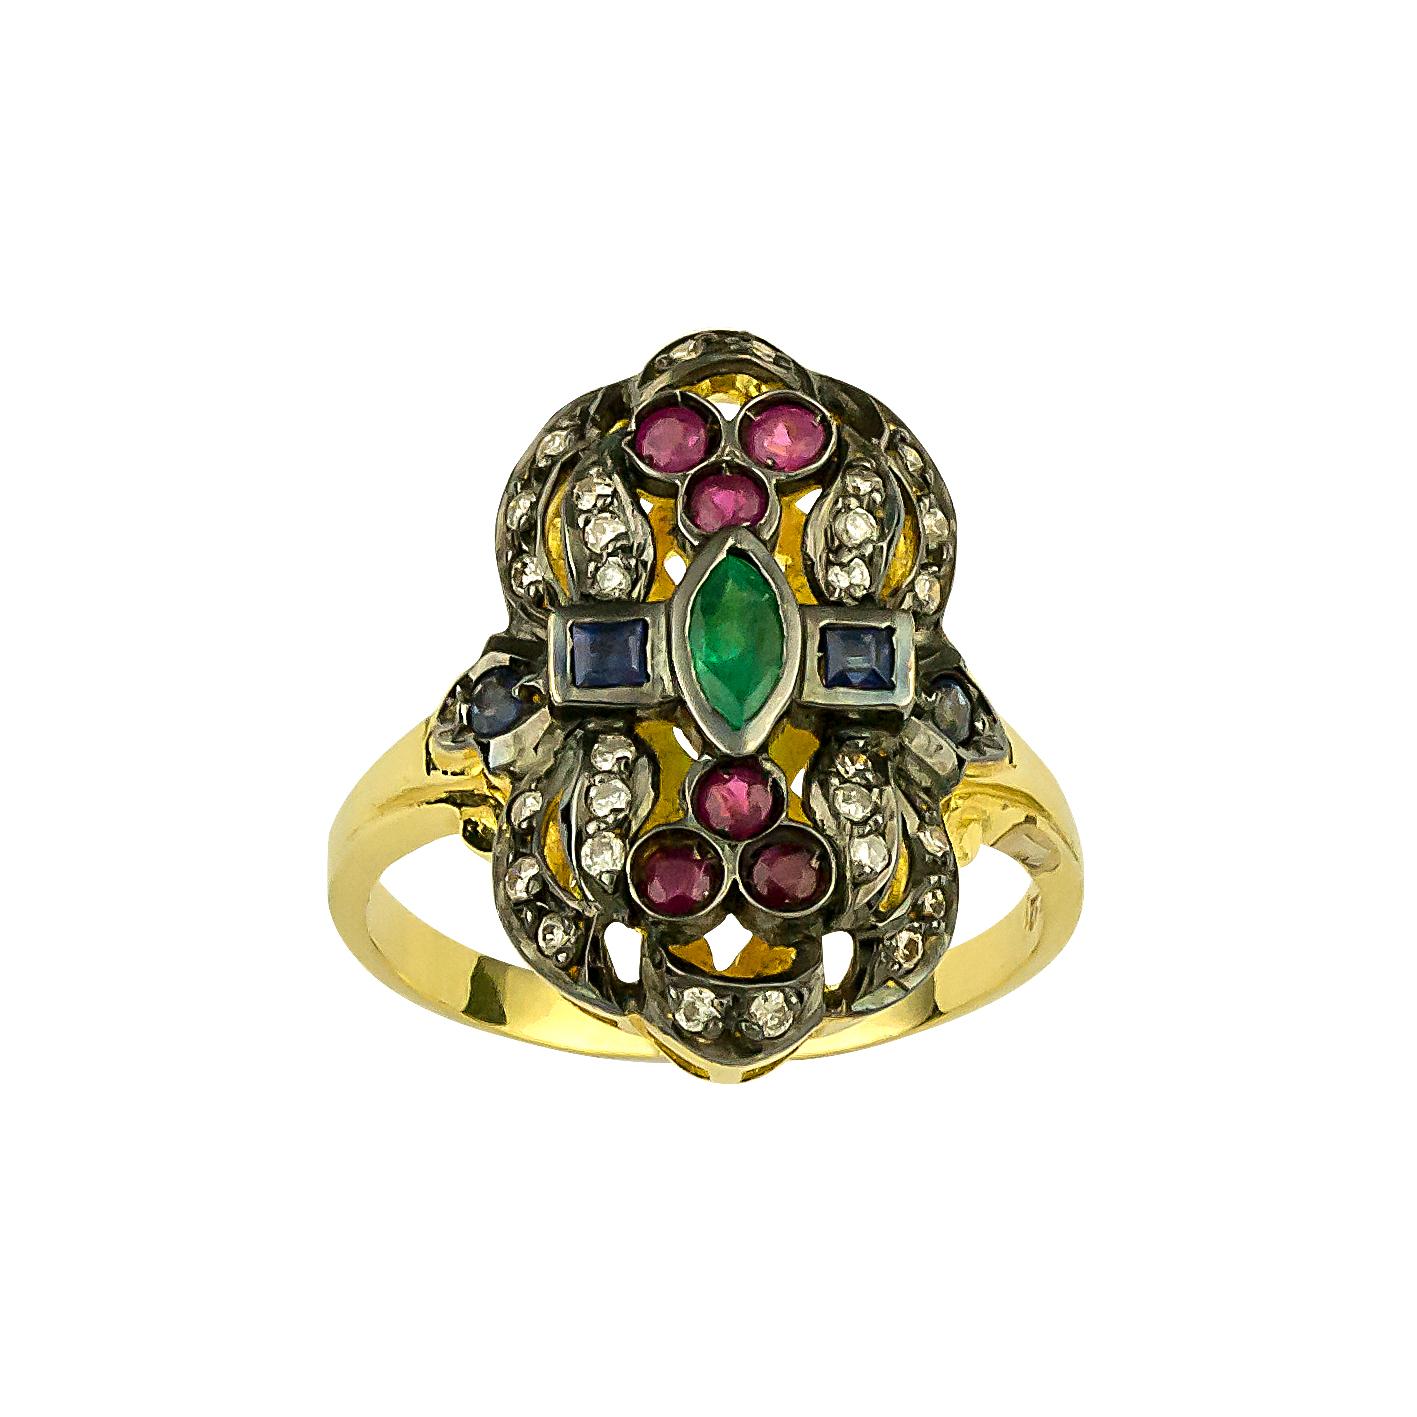 Unique S.Georgios Designer Hand Made 18 Karat Yellow Gold Ring decorated with Byzantine-style granulation and a combination of Diamonds, Rubies, Sapphires, and a center Emerald.
The Ring features Brilliant cut Diamonds total weight of 0,22 Carat,